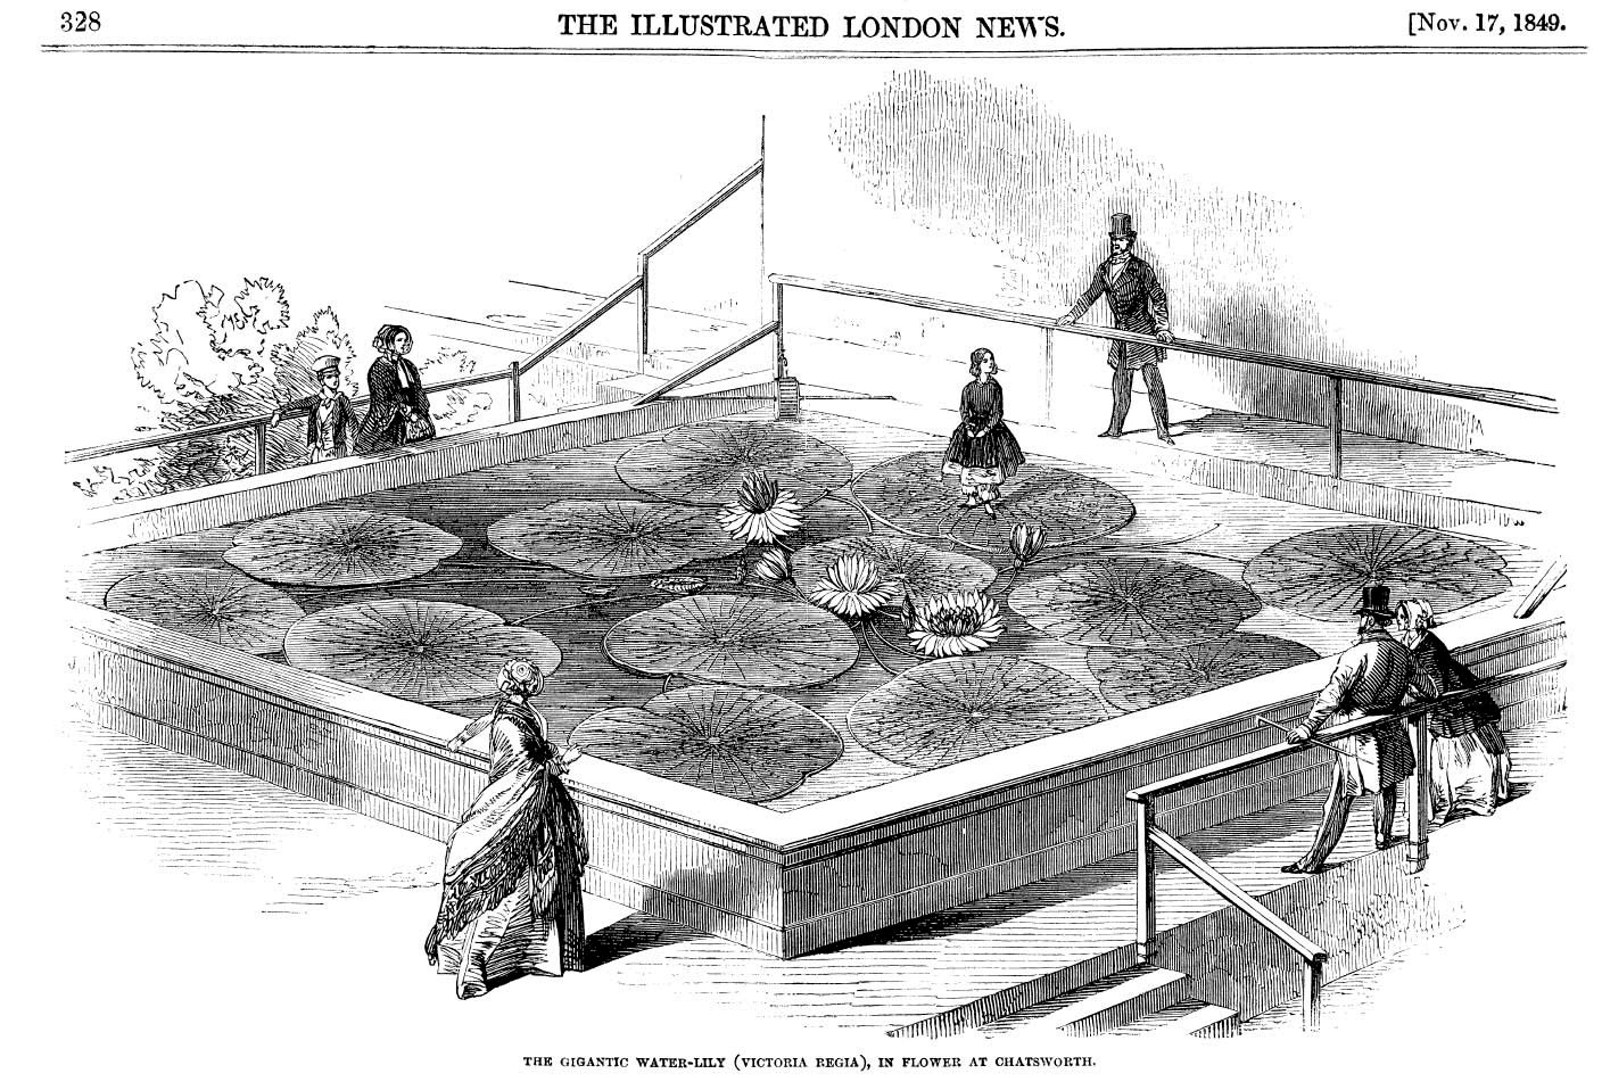 A drawing in the Illustrated London Times showing a giant waterlily taking the weight of a little girl, with other people around the square pond.